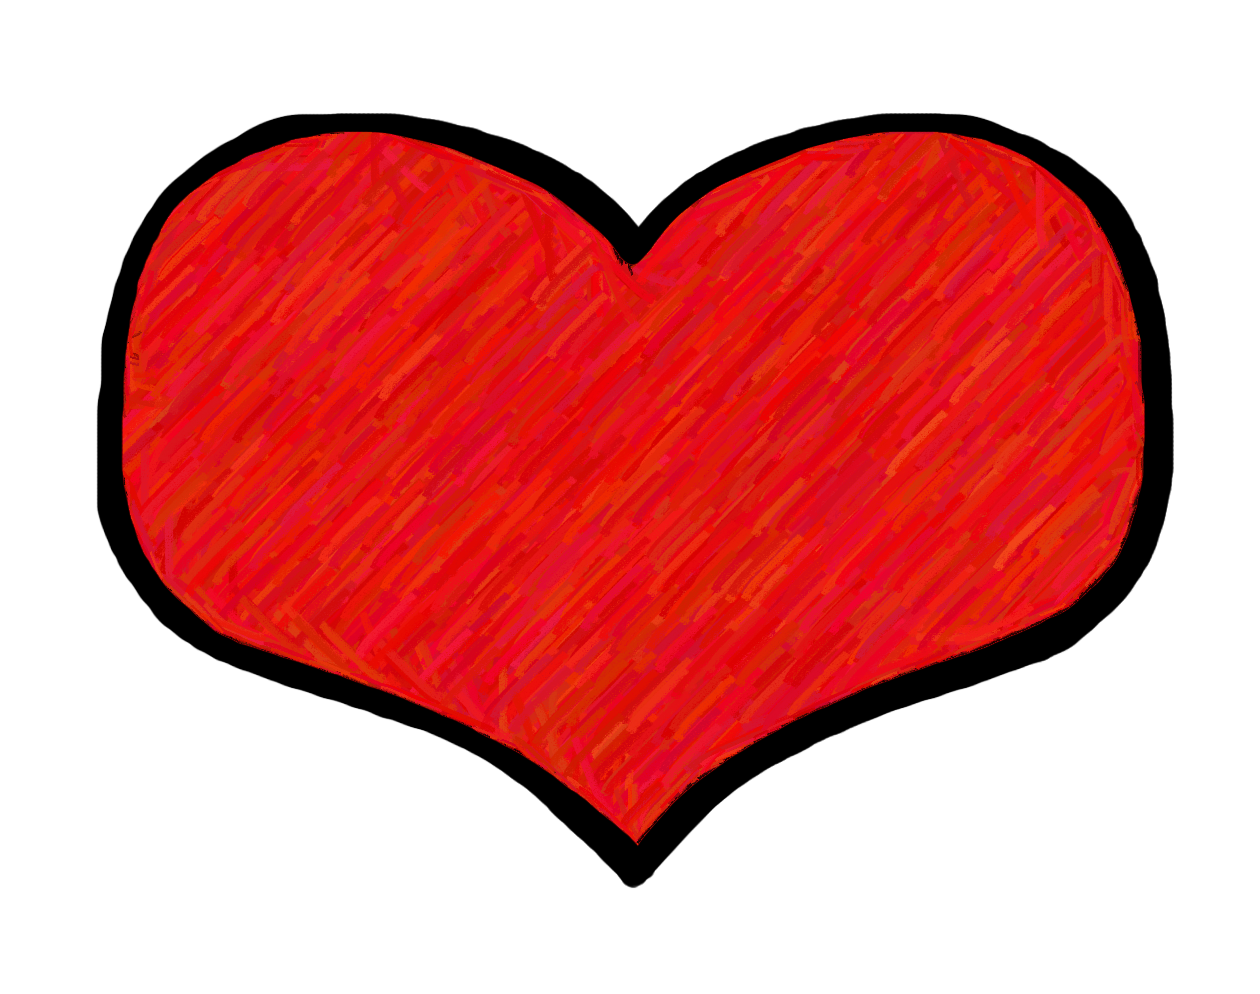 Hearts clip art images image  - Heart Image Clipart